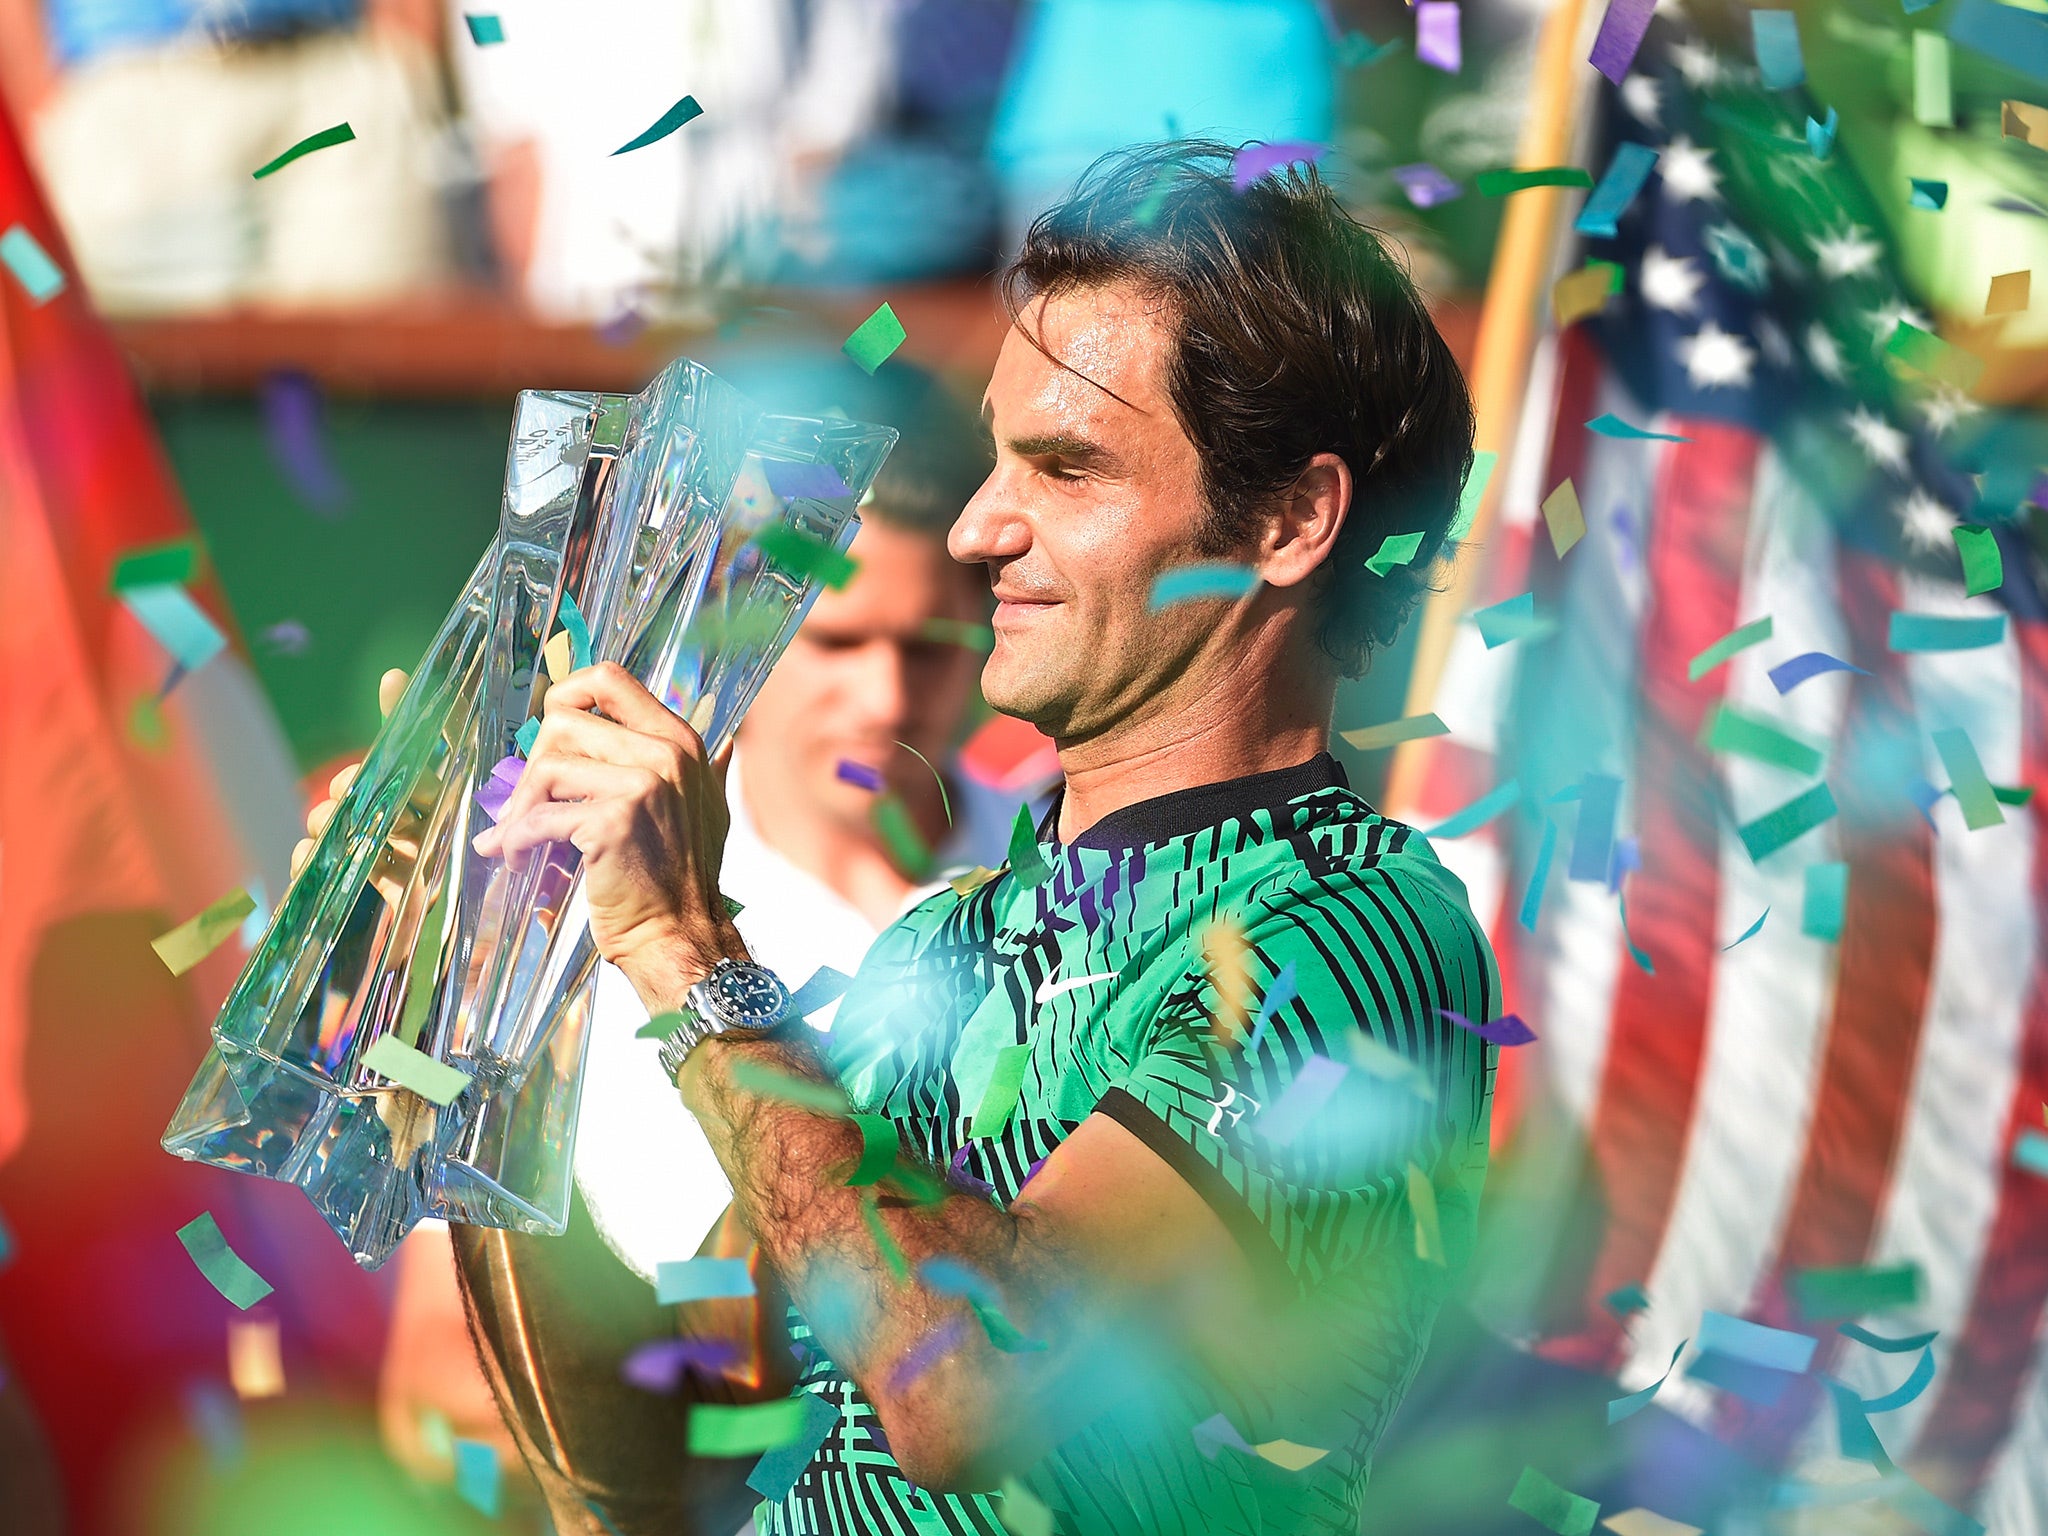 Roger Federer claimed his fifth Indian Wells title on Sunday